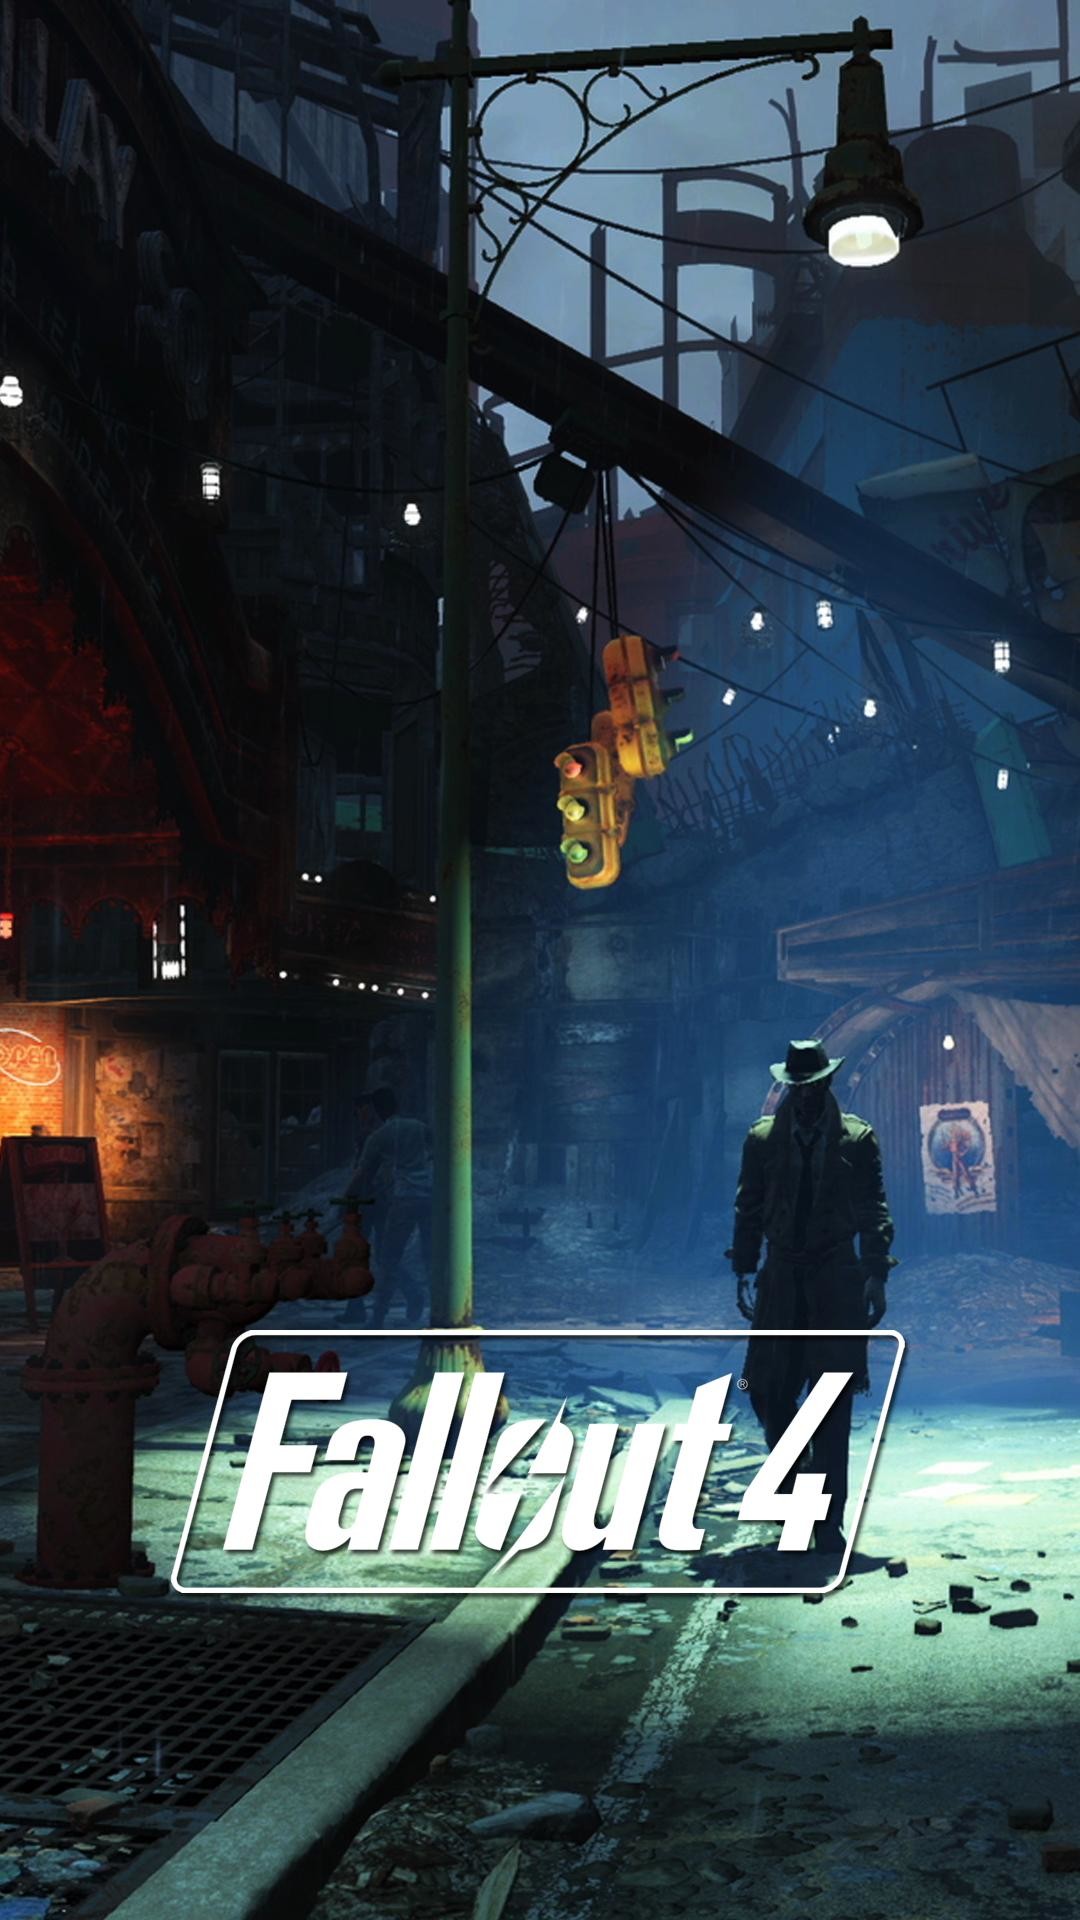 1080x1920 Fallout 4 nieuws: Prachtige iPhone- en Android wallpapers voor Fallout .